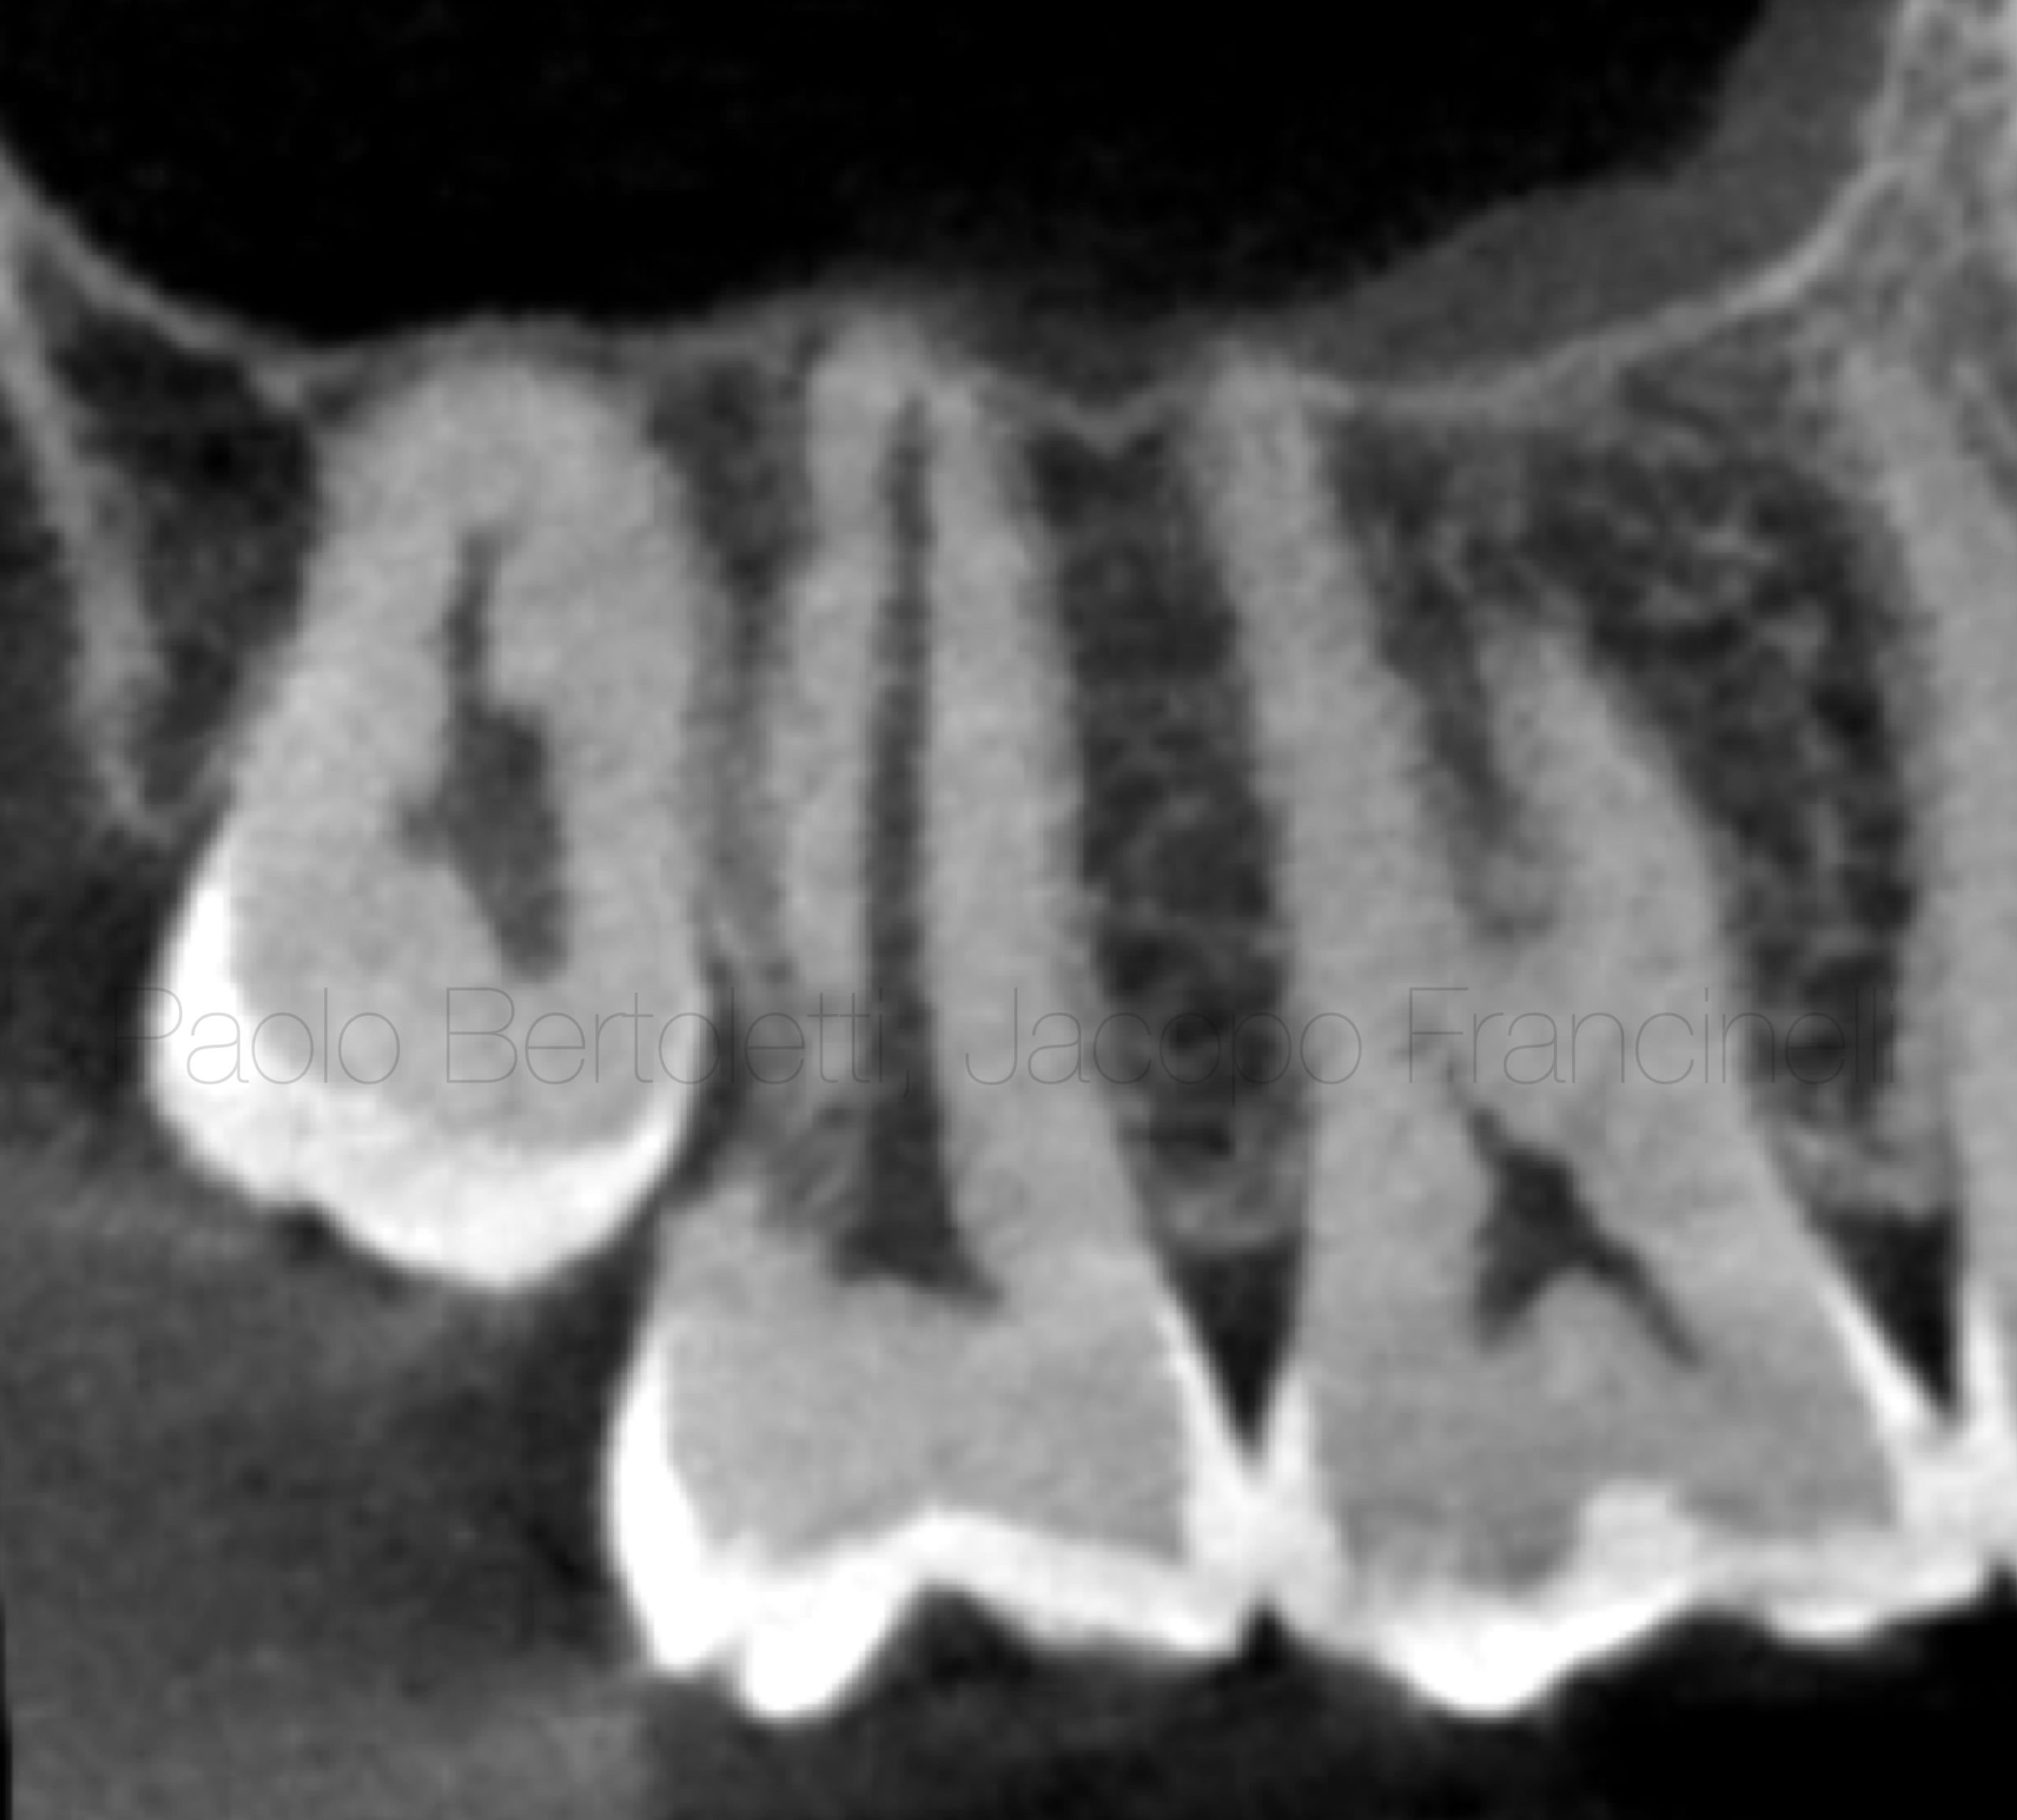 External root resorption: is intentional replantation a real option? A case report